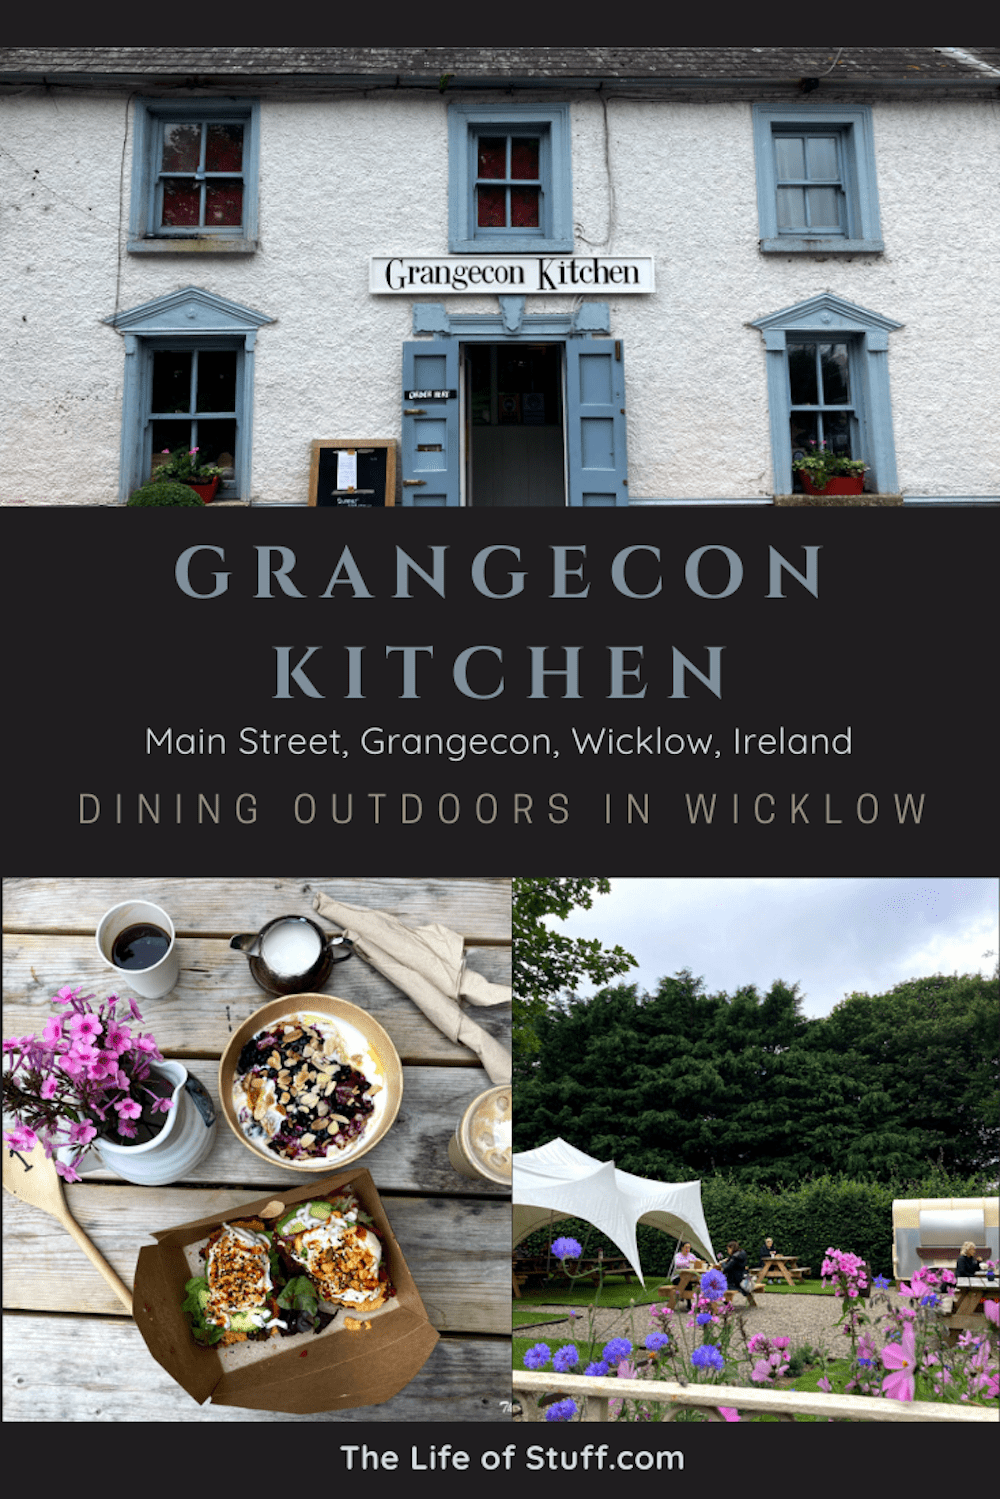 Brunch at Grangecon Kitchen, Dining Outdoors in Wicklow - The Life of Stuff